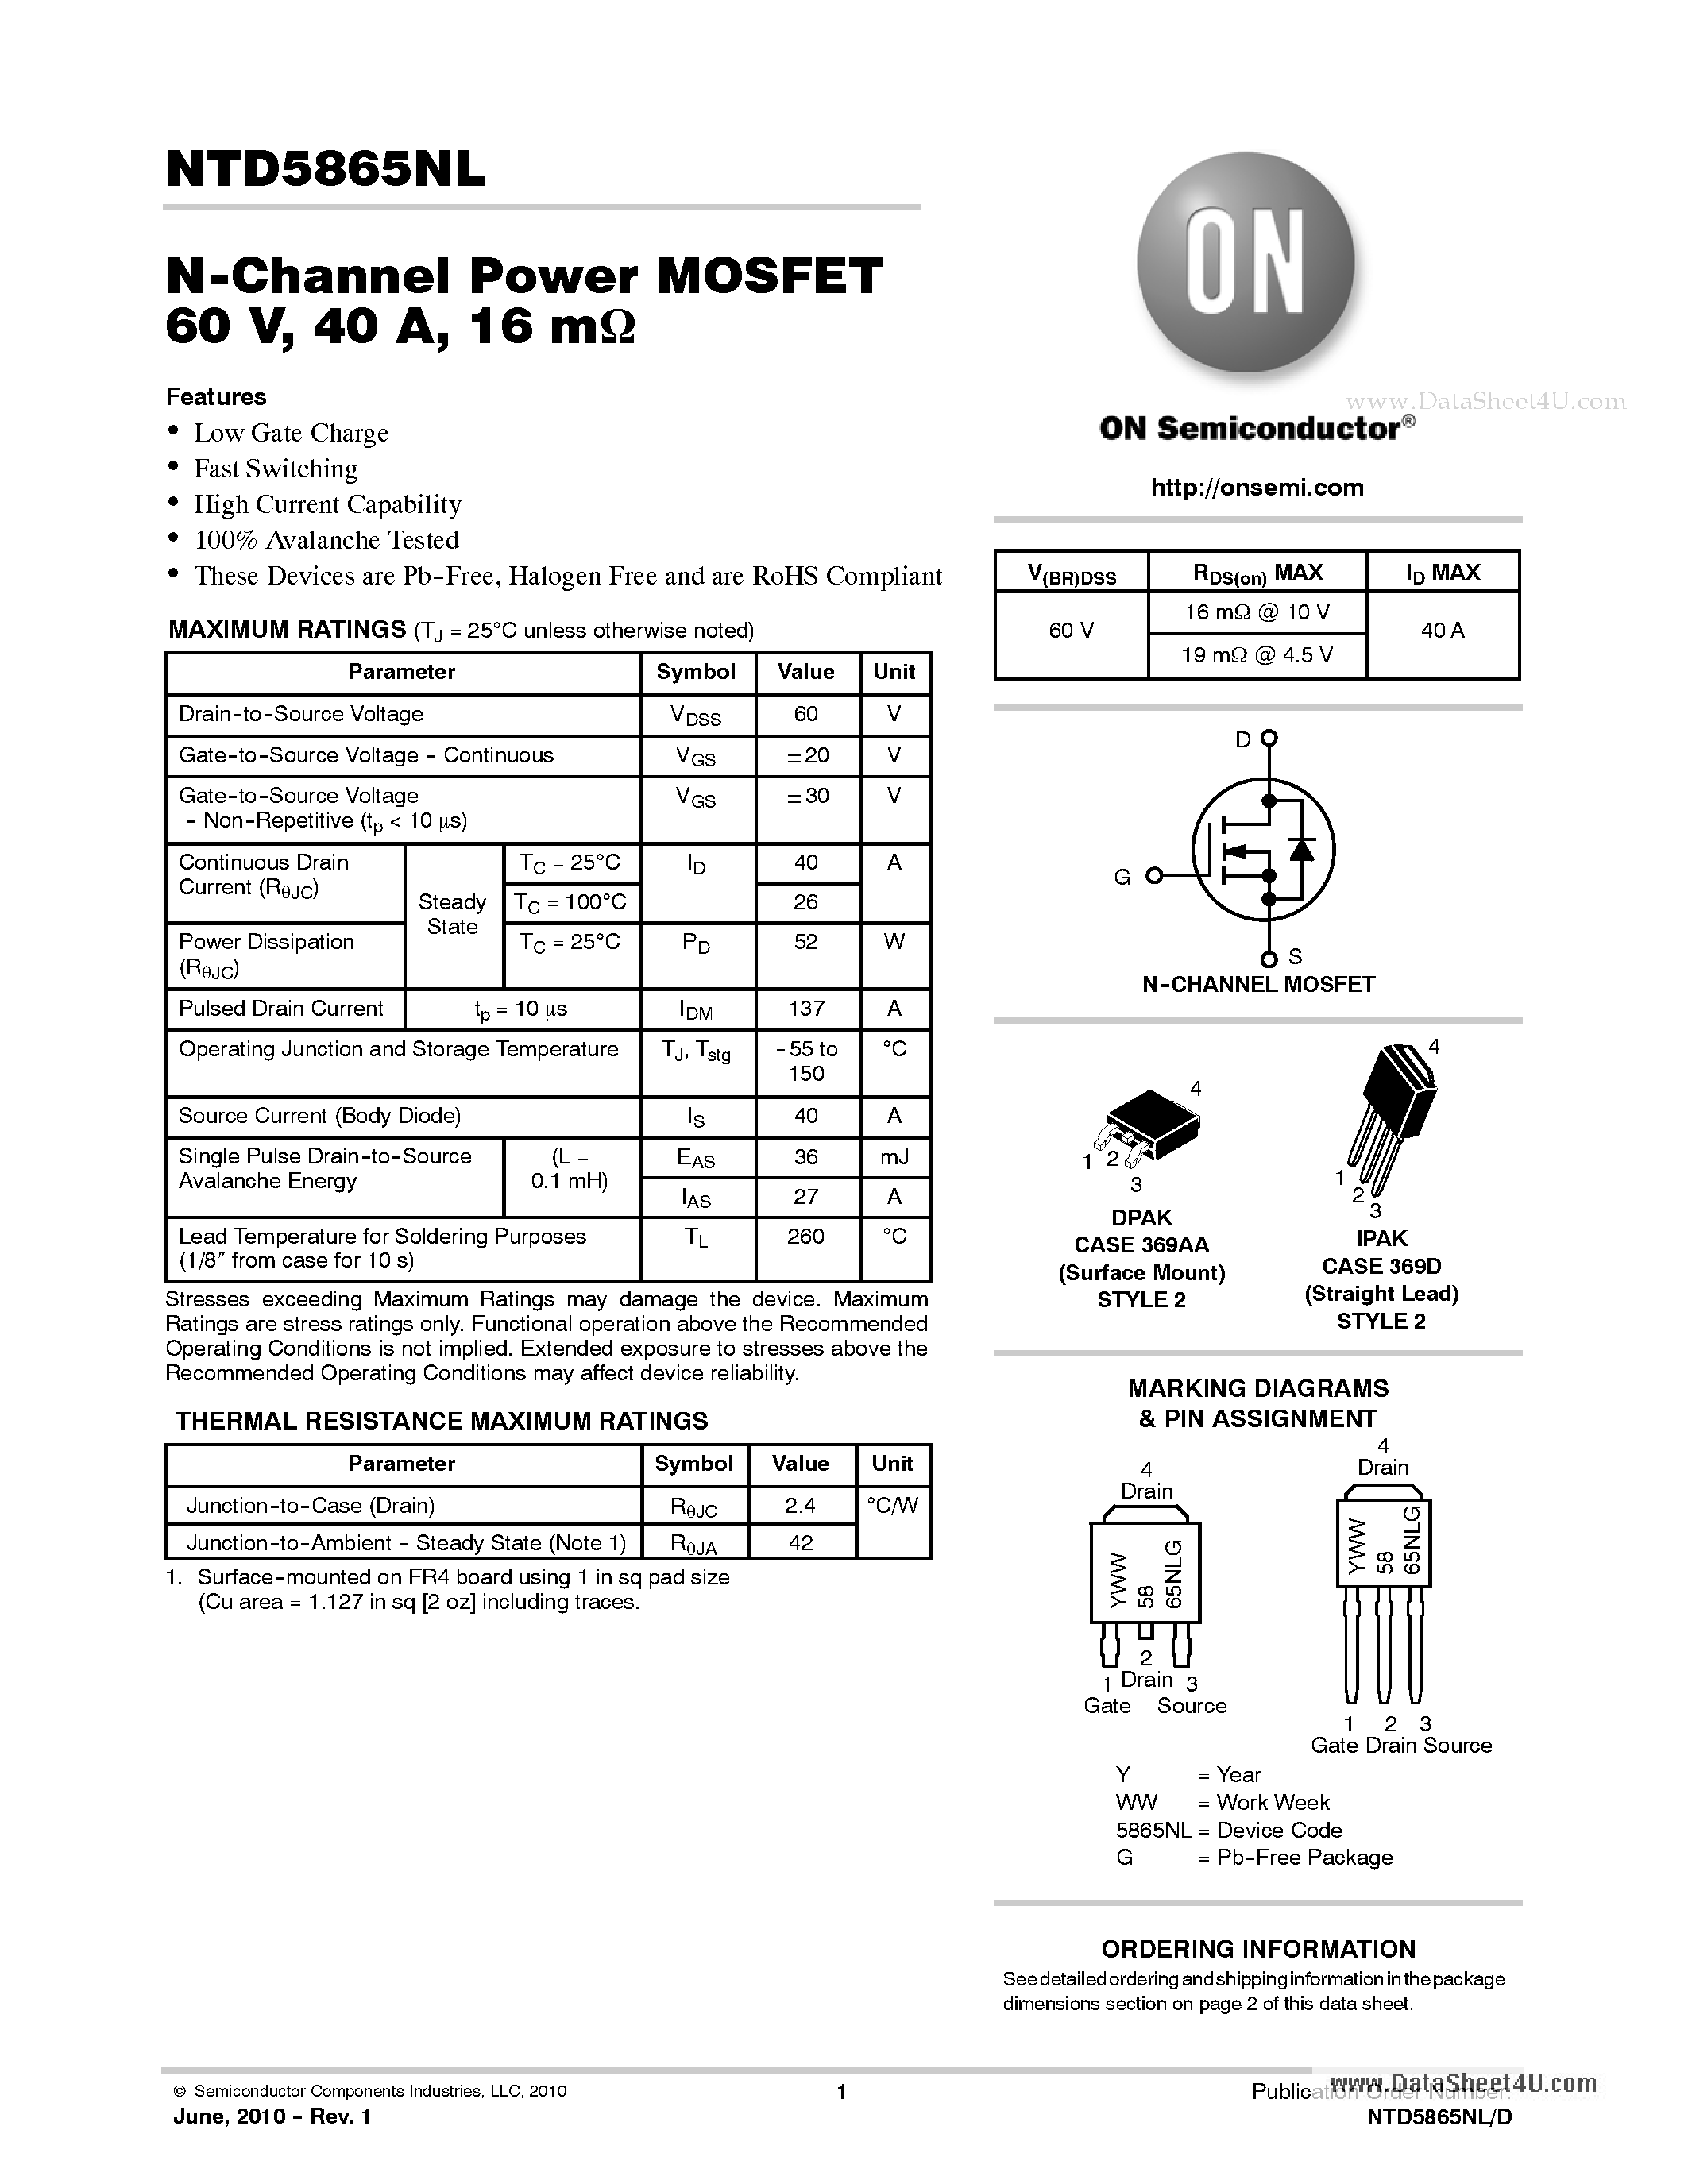 Datasheet NTD5865NL - N-Channel Power MOSFET 60 V / 40 A / 16 m ome page 1